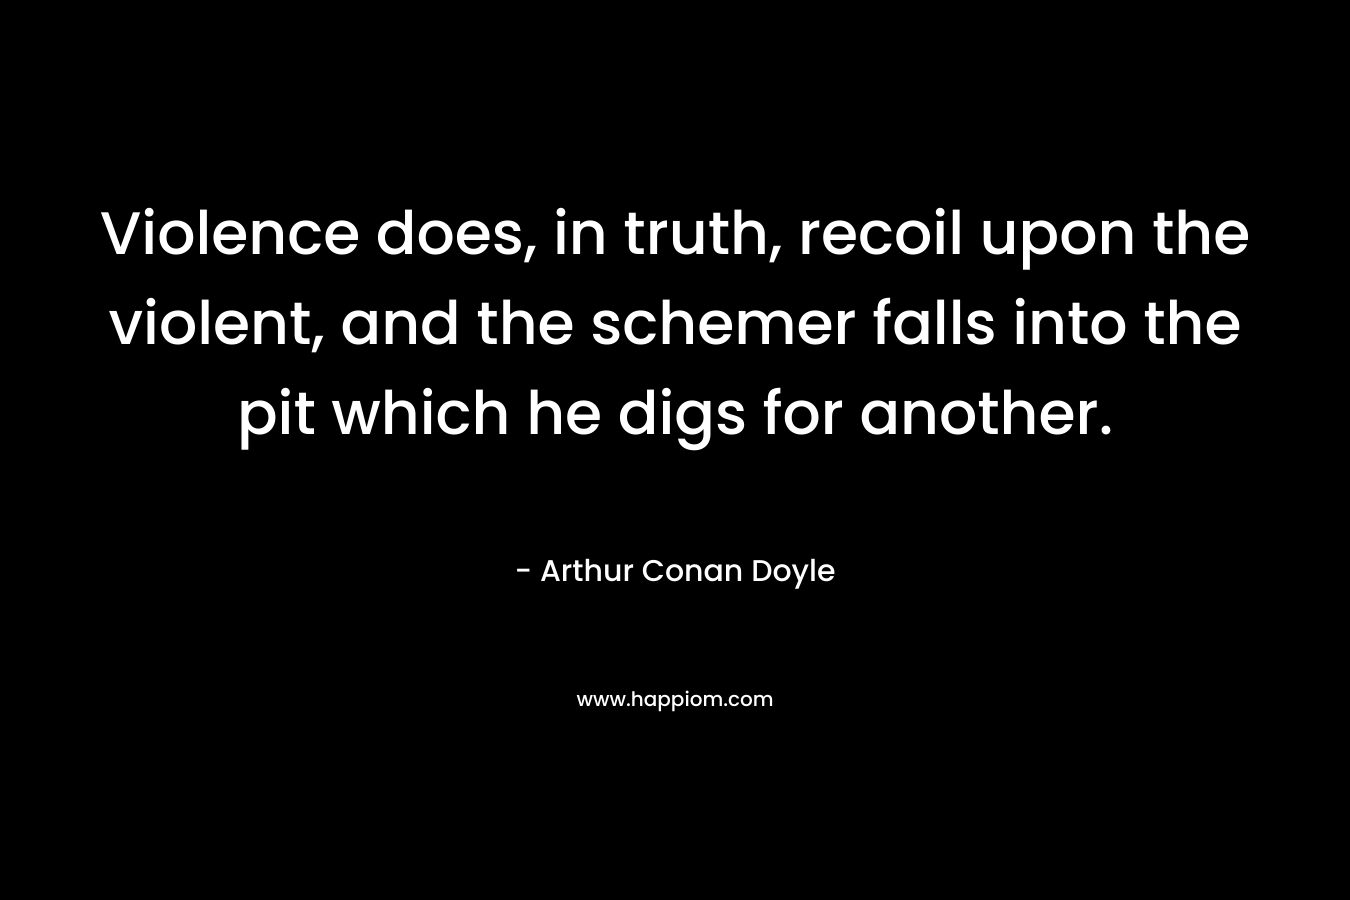 Violence does, in truth, recoil upon the violent, and the schemer falls into the pit which he digs for another.